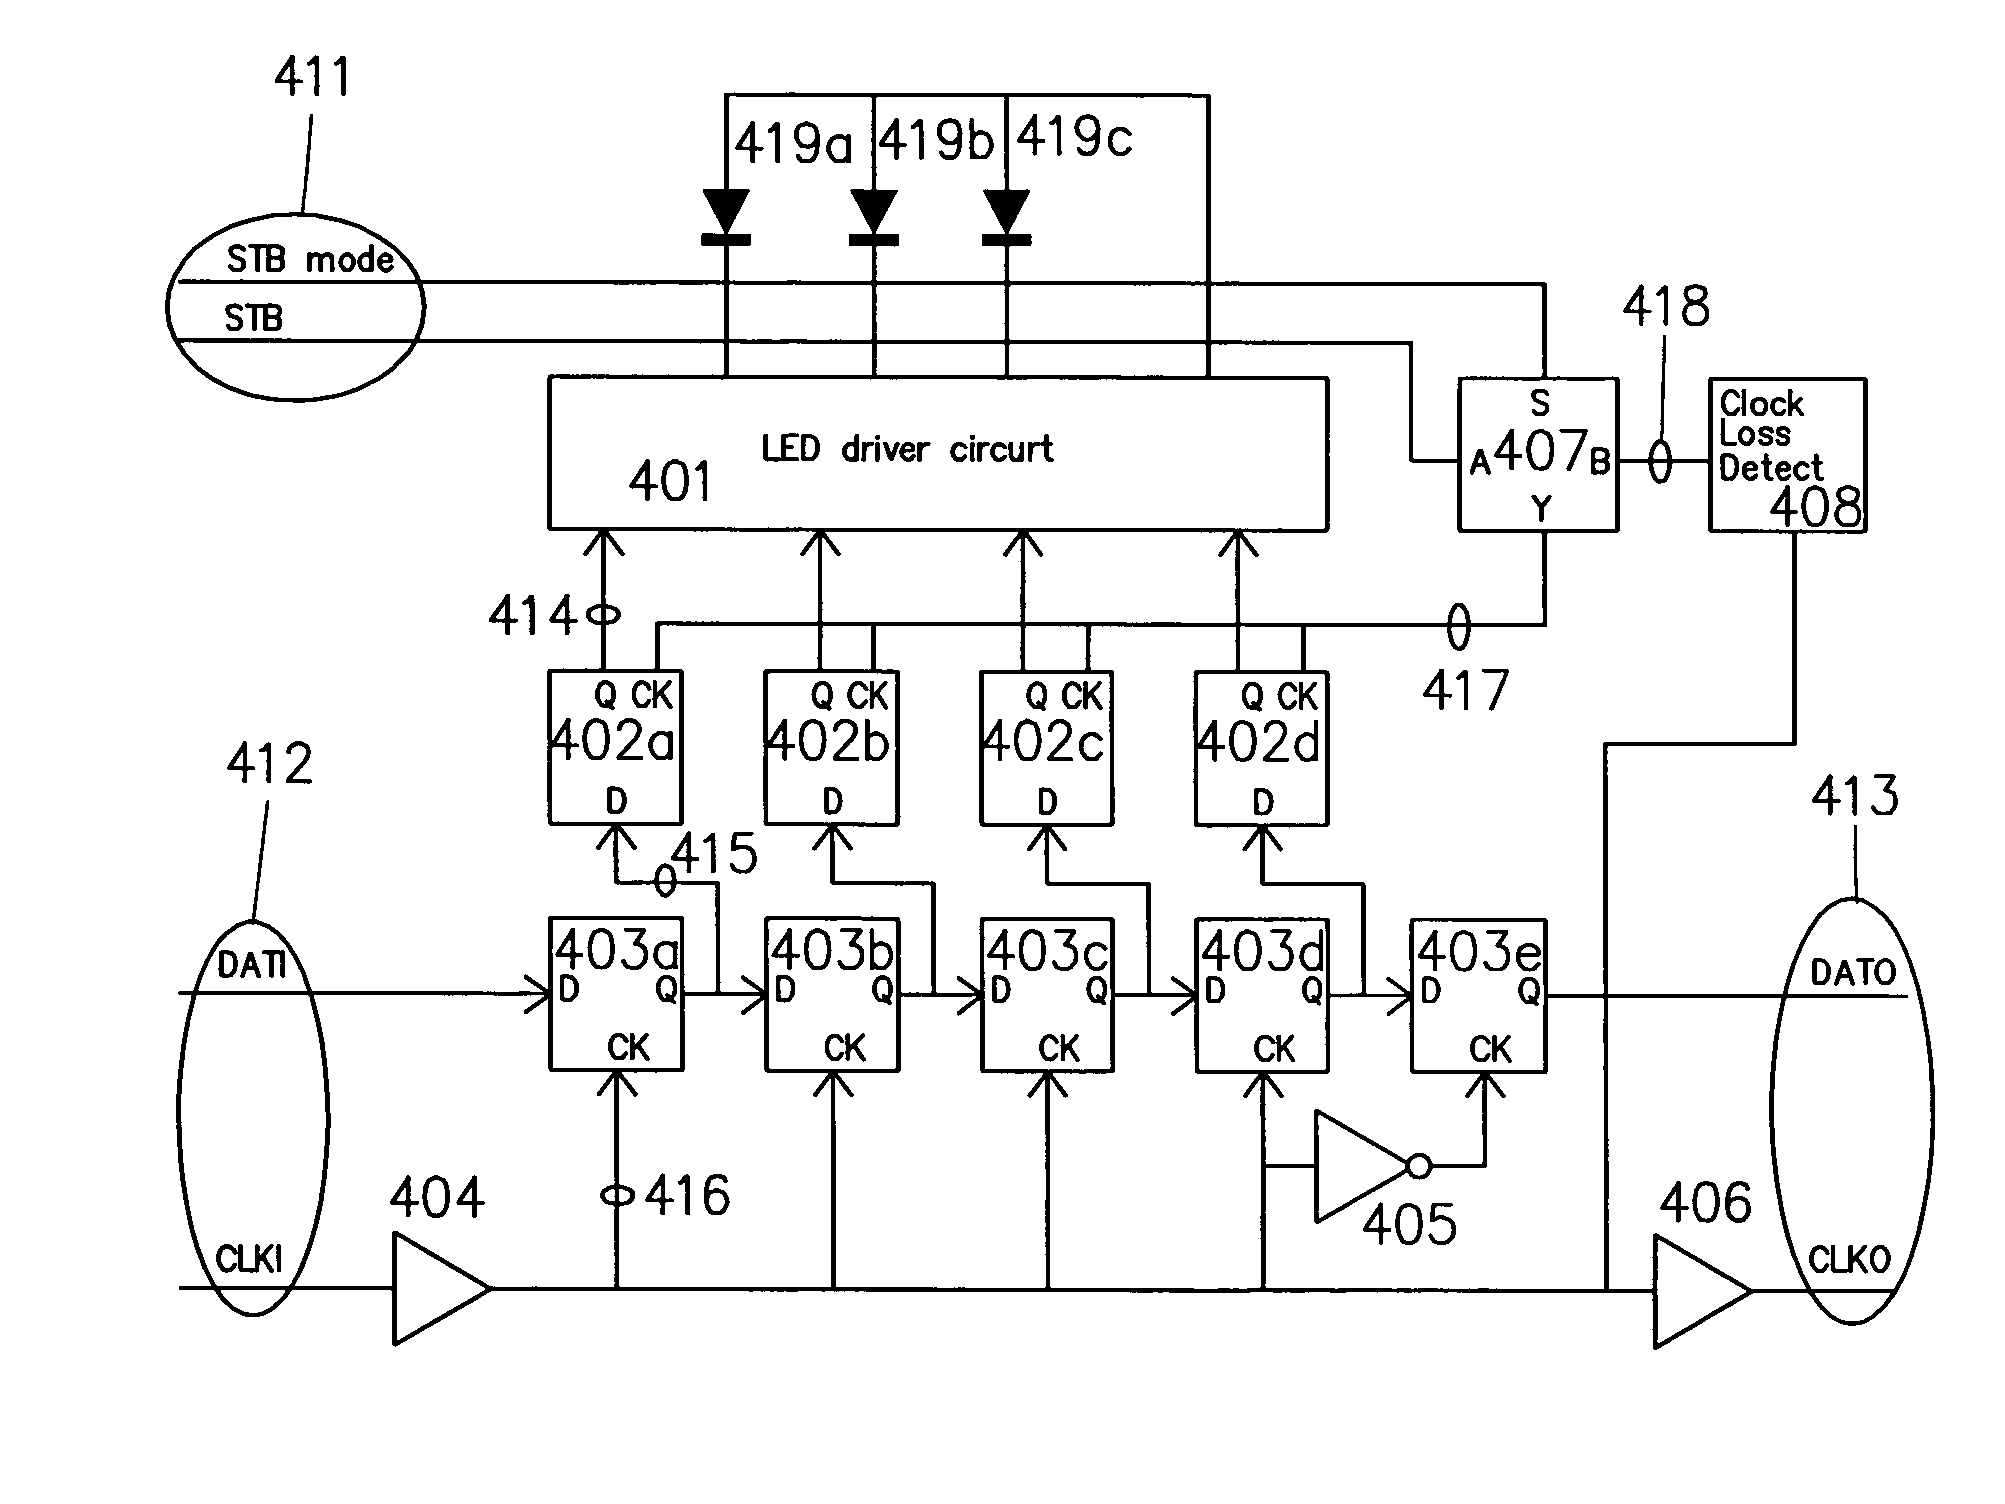 Serially connected LED lamps control device